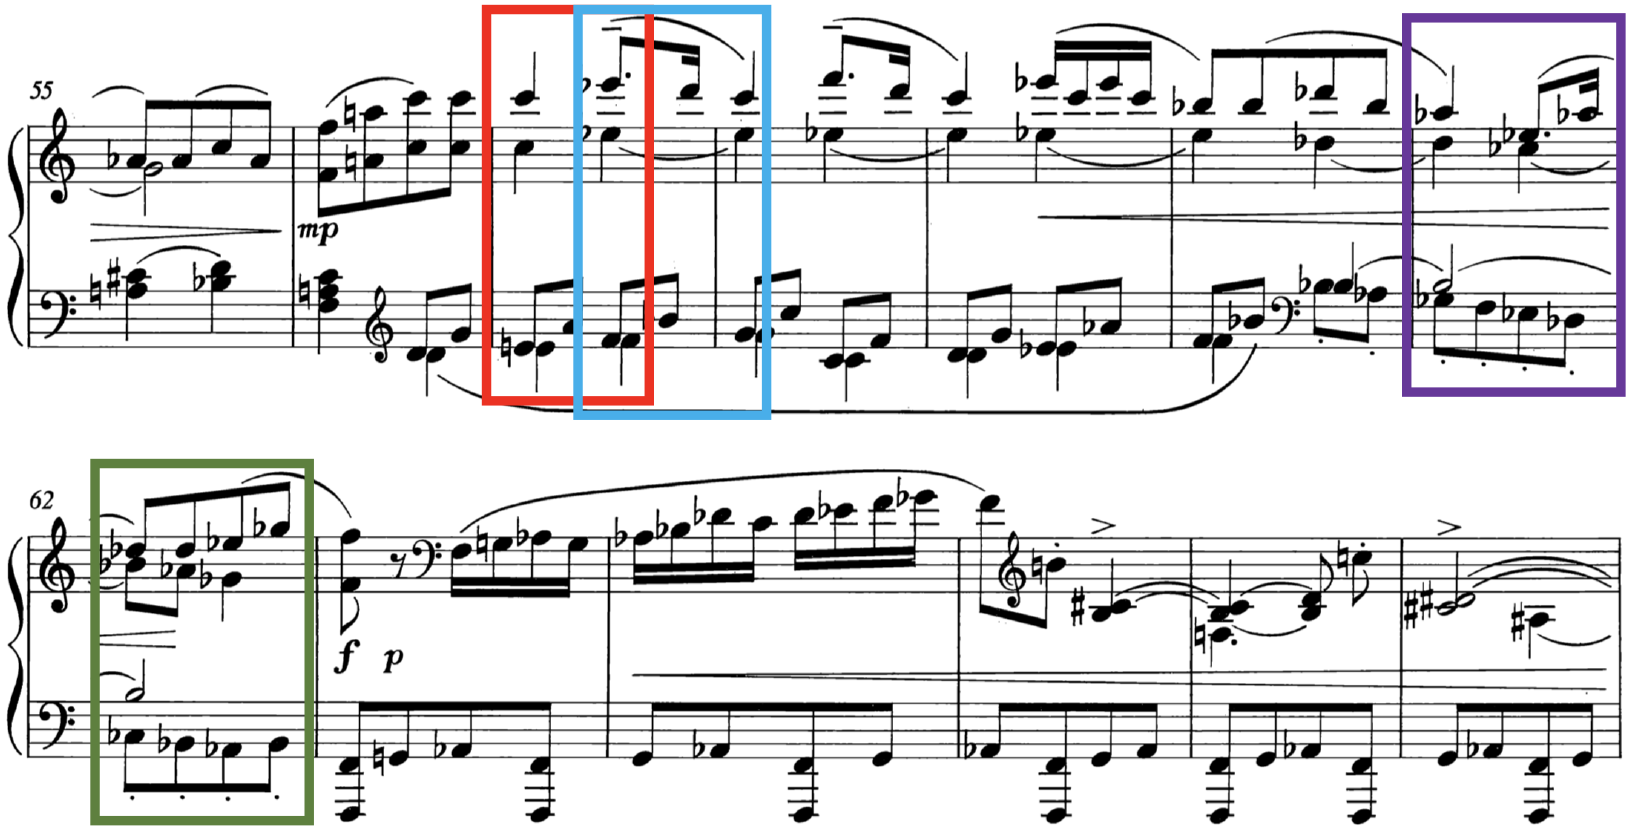 Two sets of staves with a treble and bass clef identified for each. Portions of the music are specifically identified. More in description below.